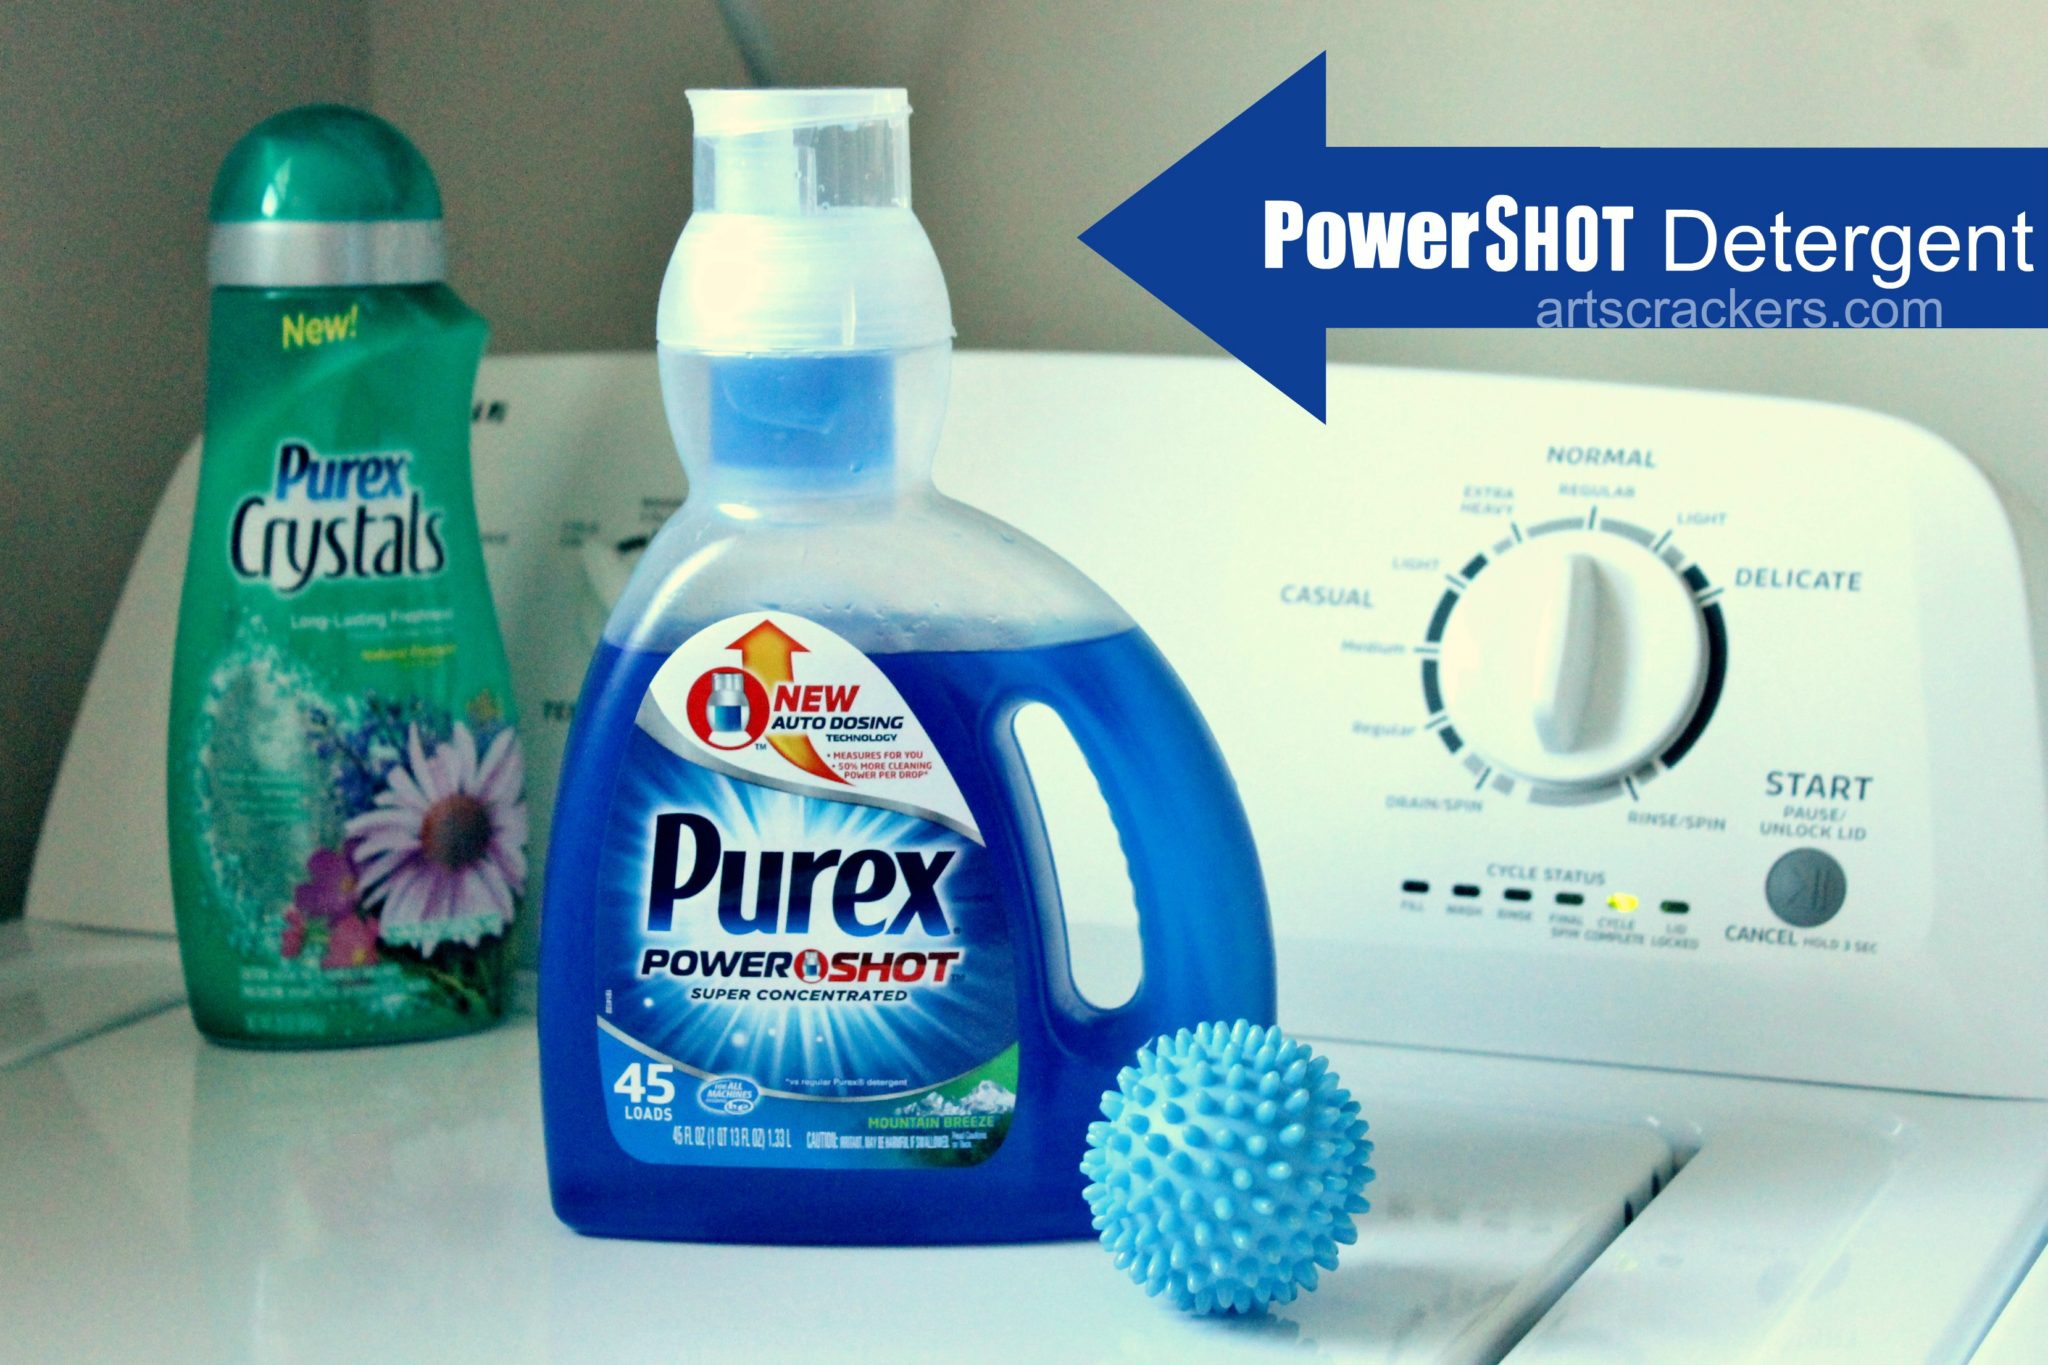 Purex PowerShot Detergent. Click the picture to read the review.